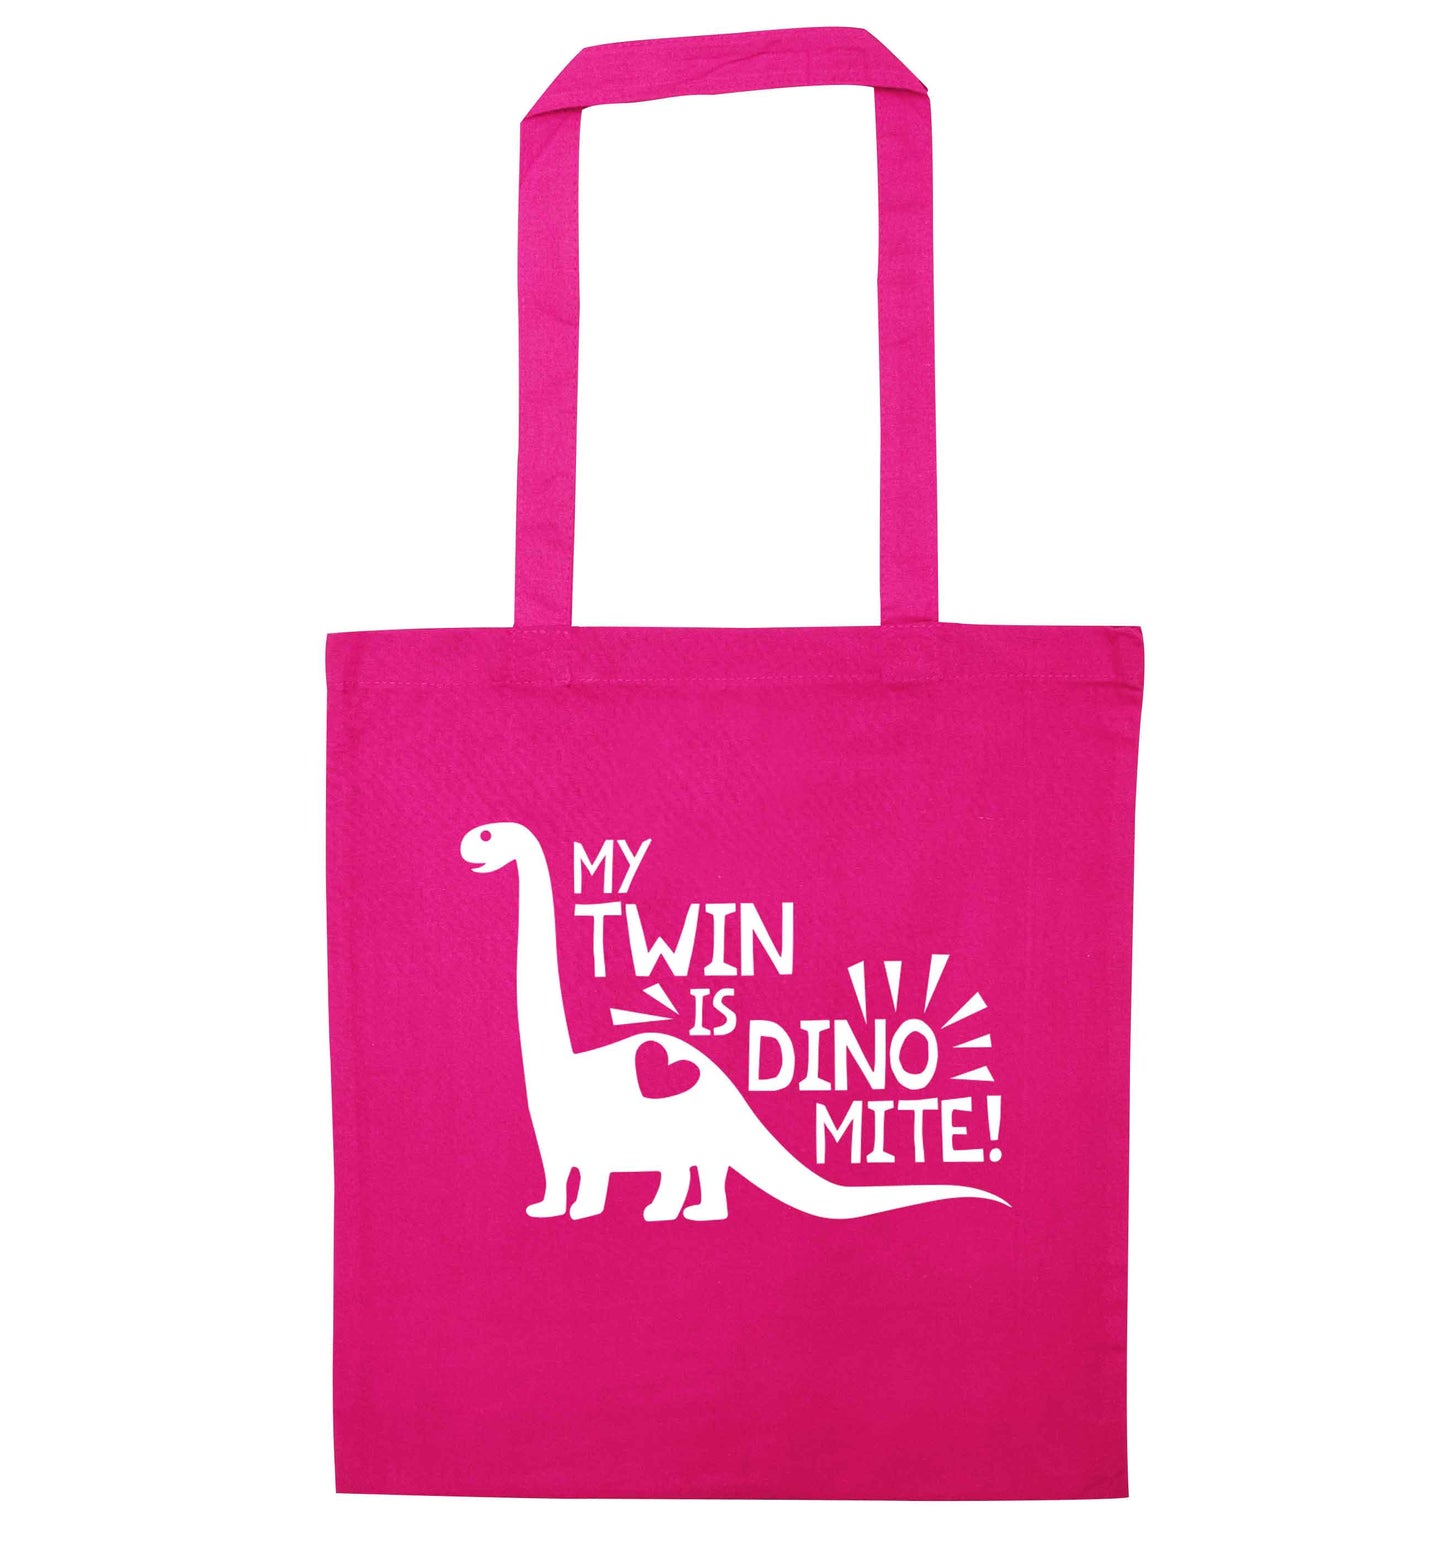 My twin is dinomite! pink tote bag